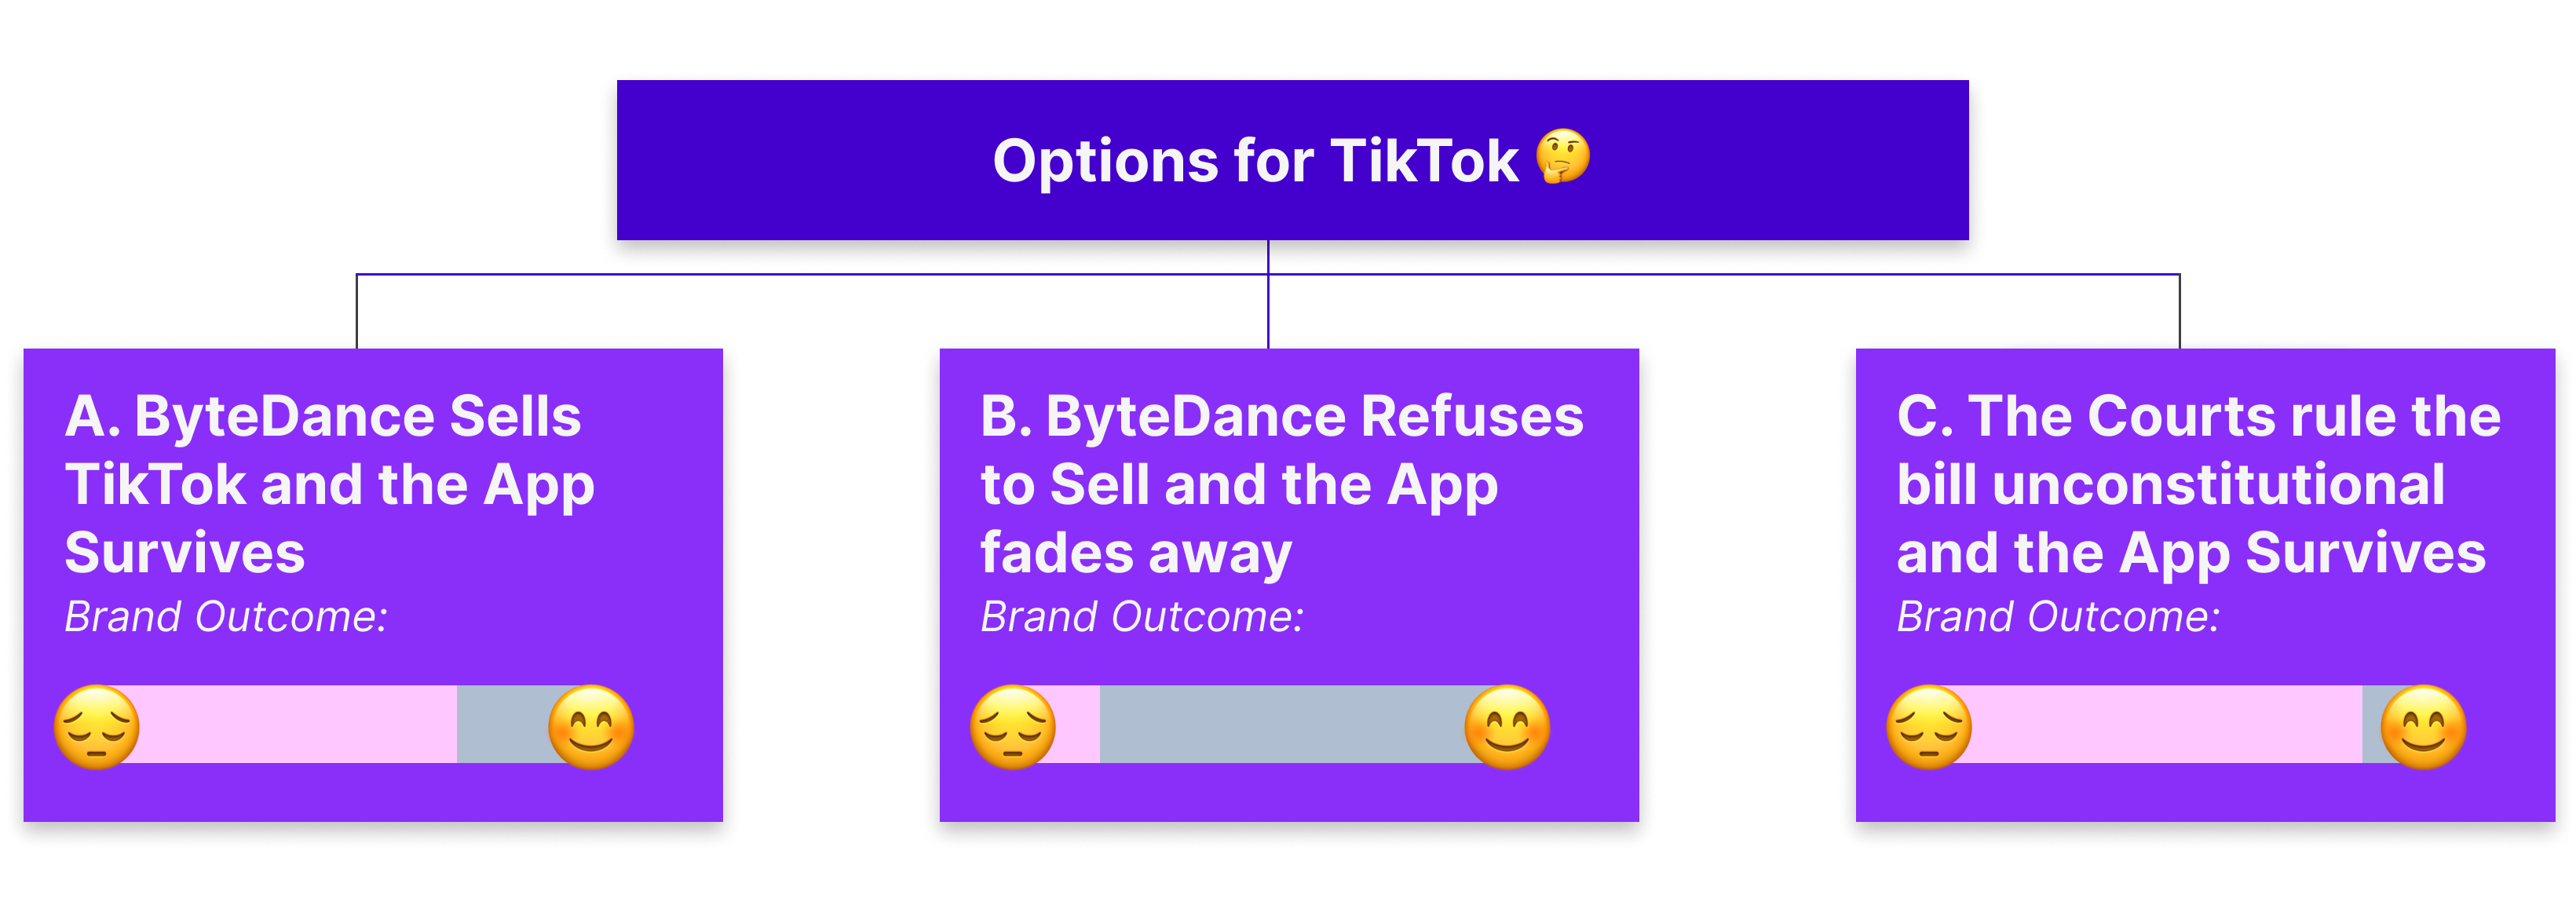 TikTok Ban outcomes;
A. Bytedance sells tiktok and the app surivives
B. Bytedance refuses to sell and the app fades away
C. The Courts rule the bill unconstitutional and the app surivives